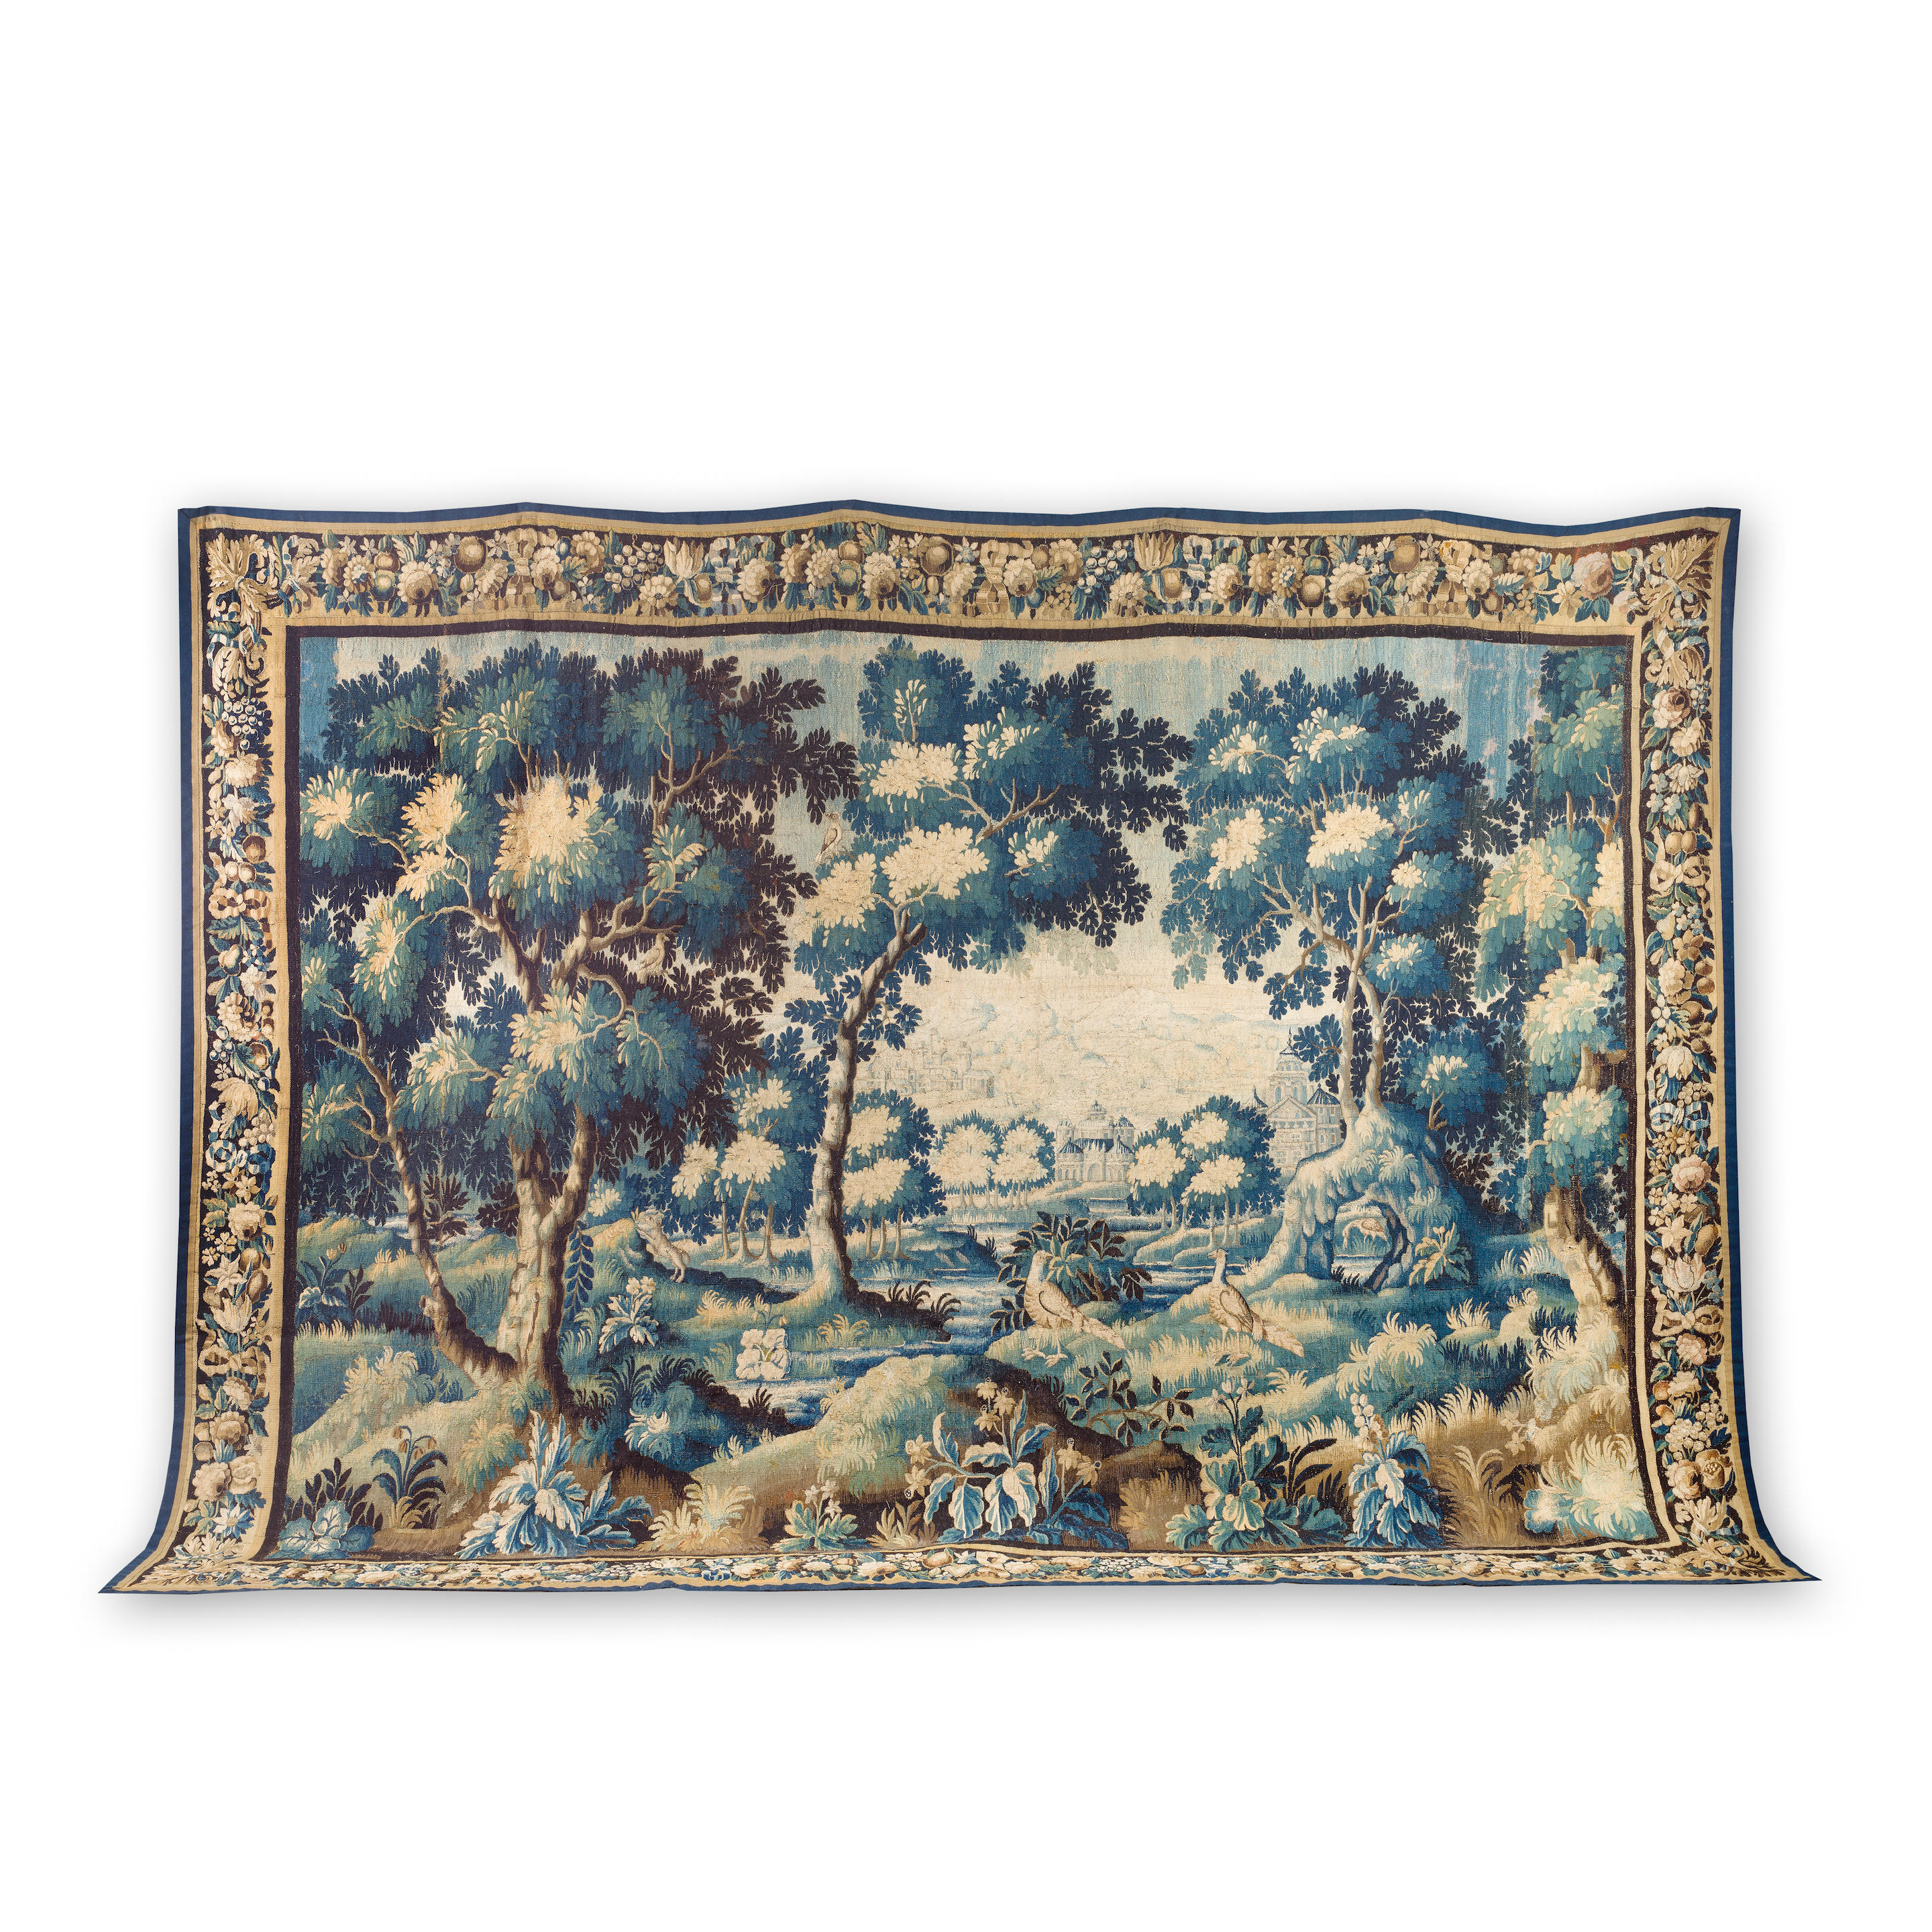 Collections: Including The Peta Smyth Collection of Antique Textiles & Tapestries, Selected Items From The Collection of Lord & Lady Flight, and The Contents of Chequers' Attics